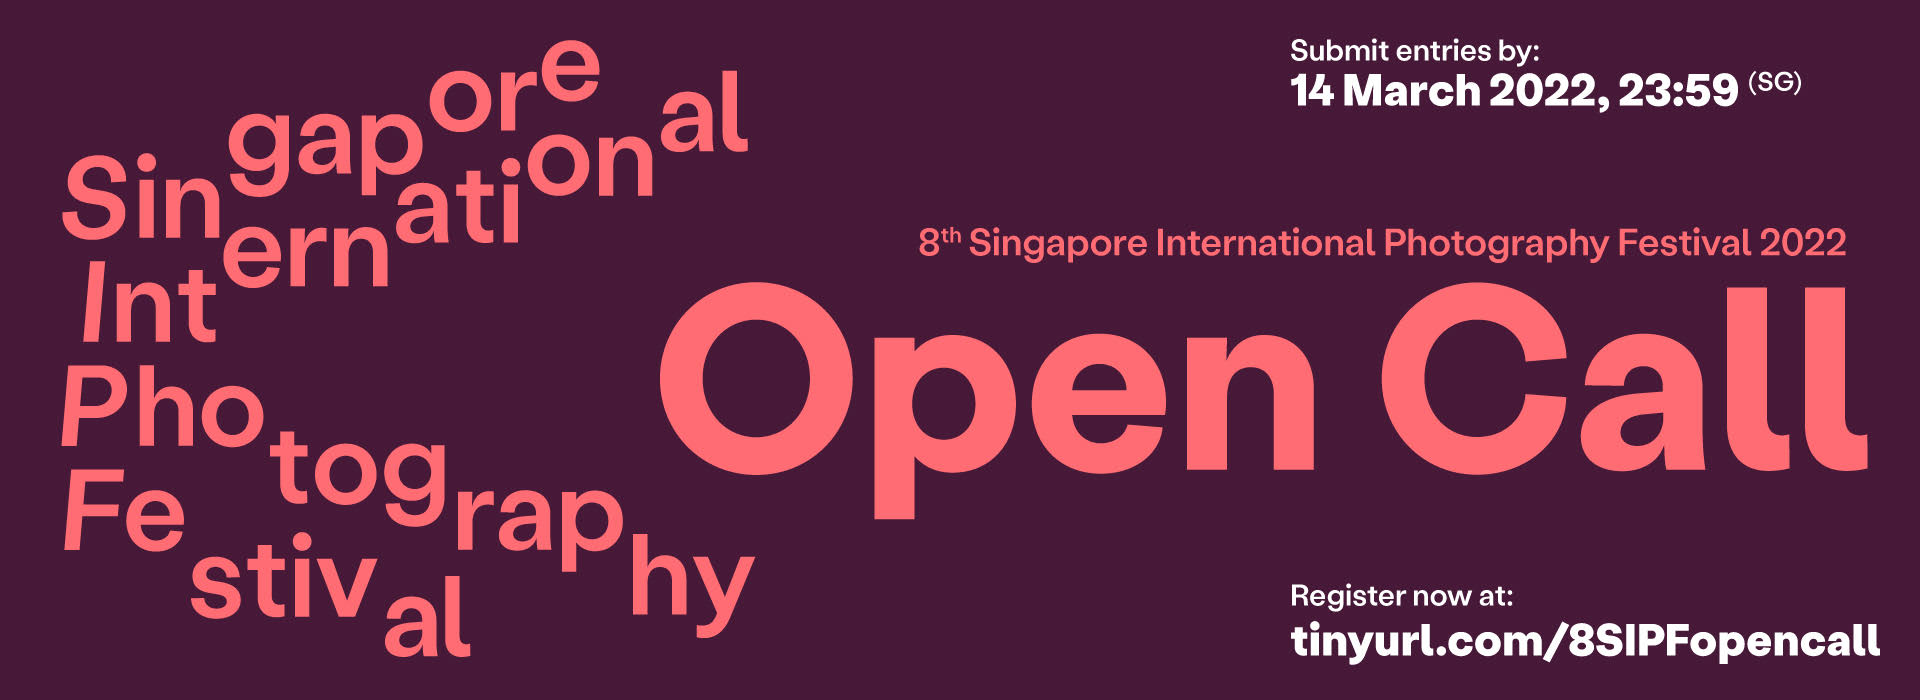 8th Singapore International Photography Festival open call banner